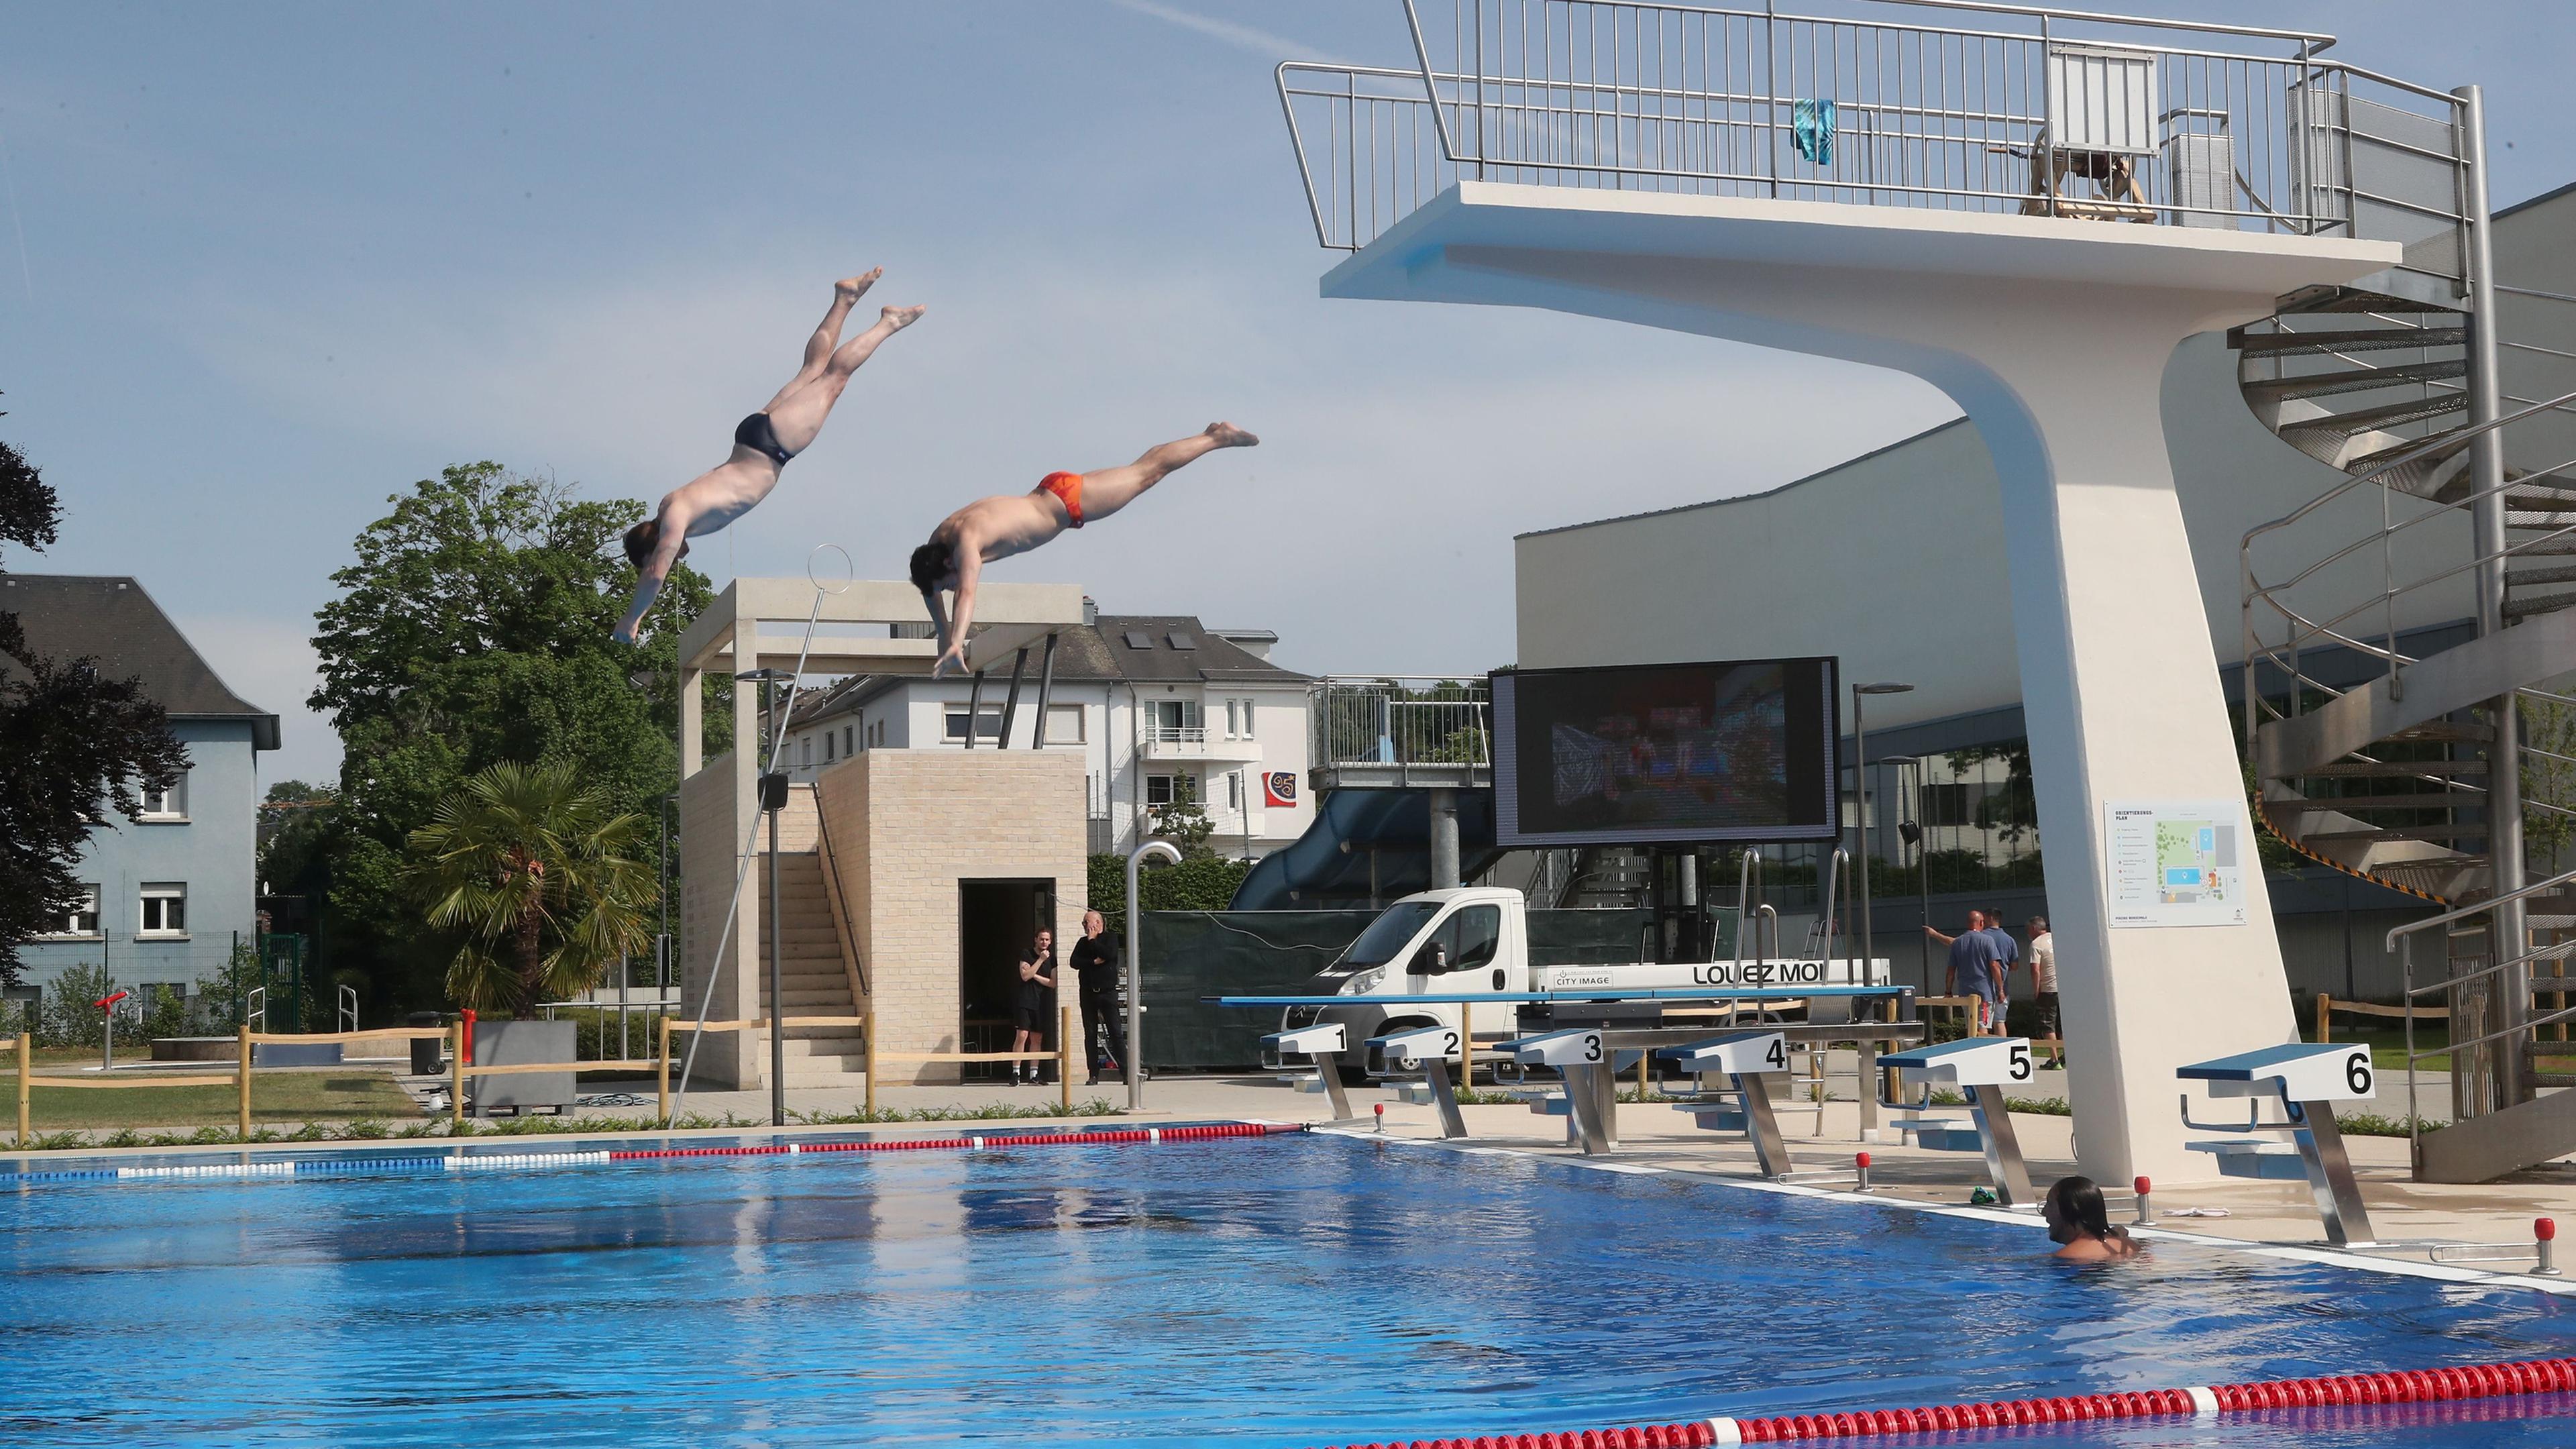 Following three years' renovation Dudelange pool is the place to make a splash from the diving board 